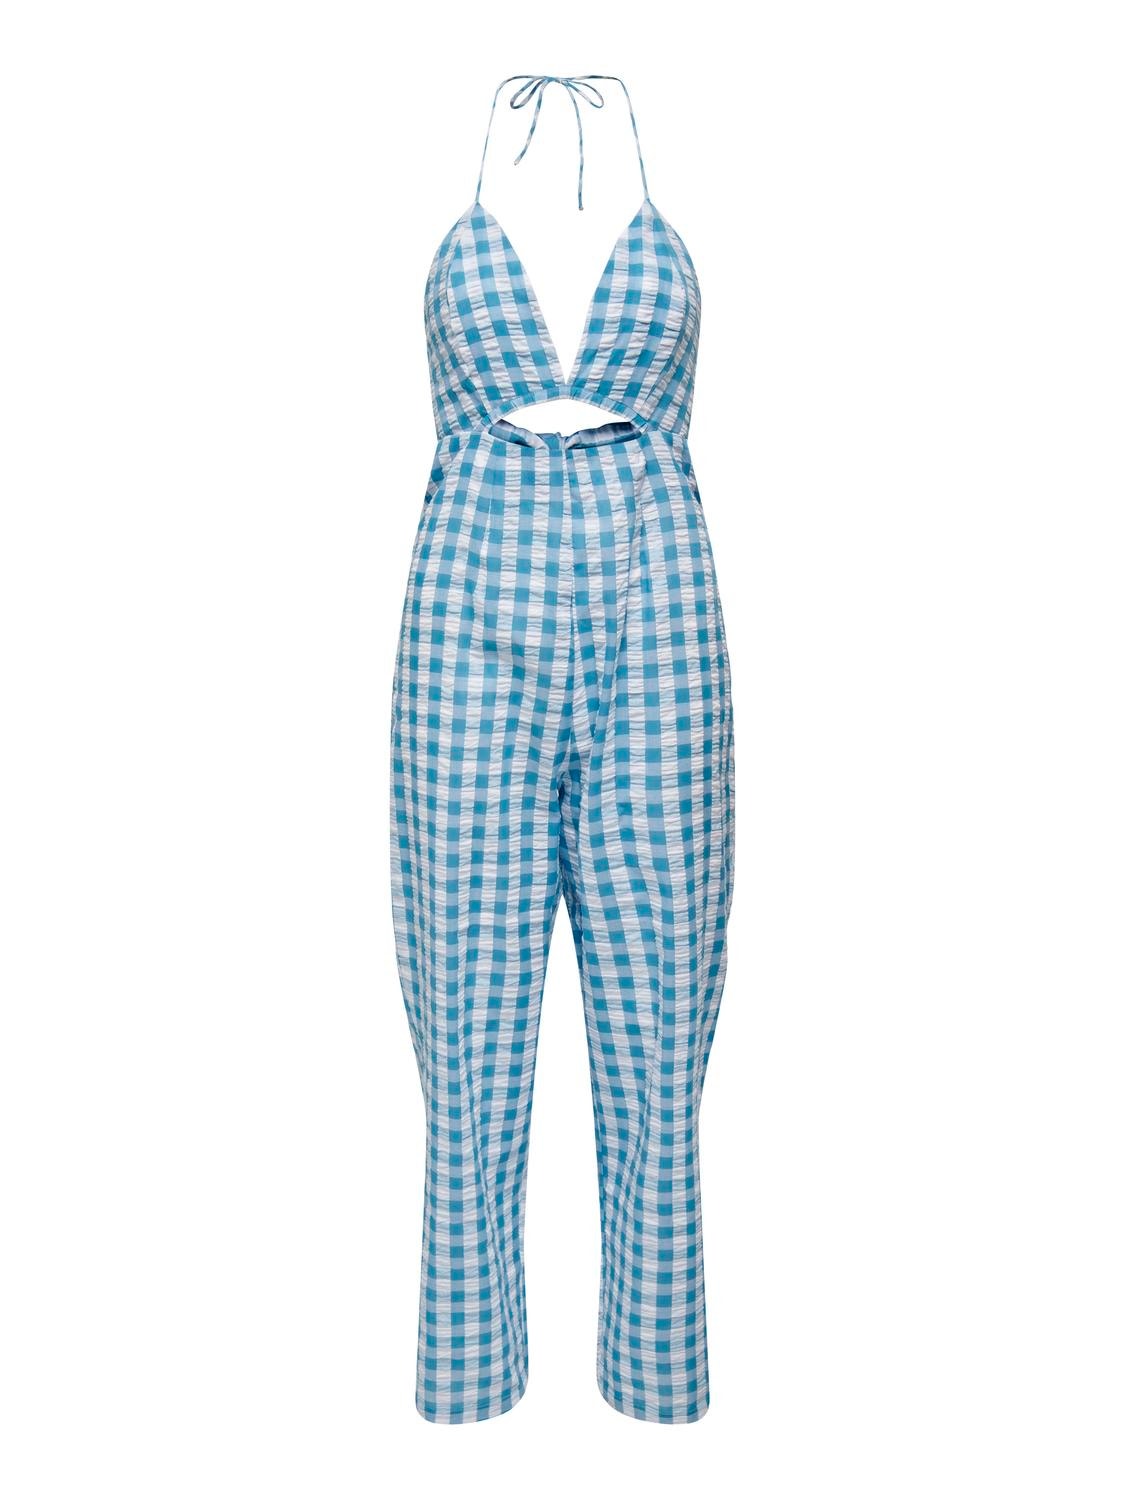 ONLY Jumpsuit With Cut Out -Horizon Blue - 15297190